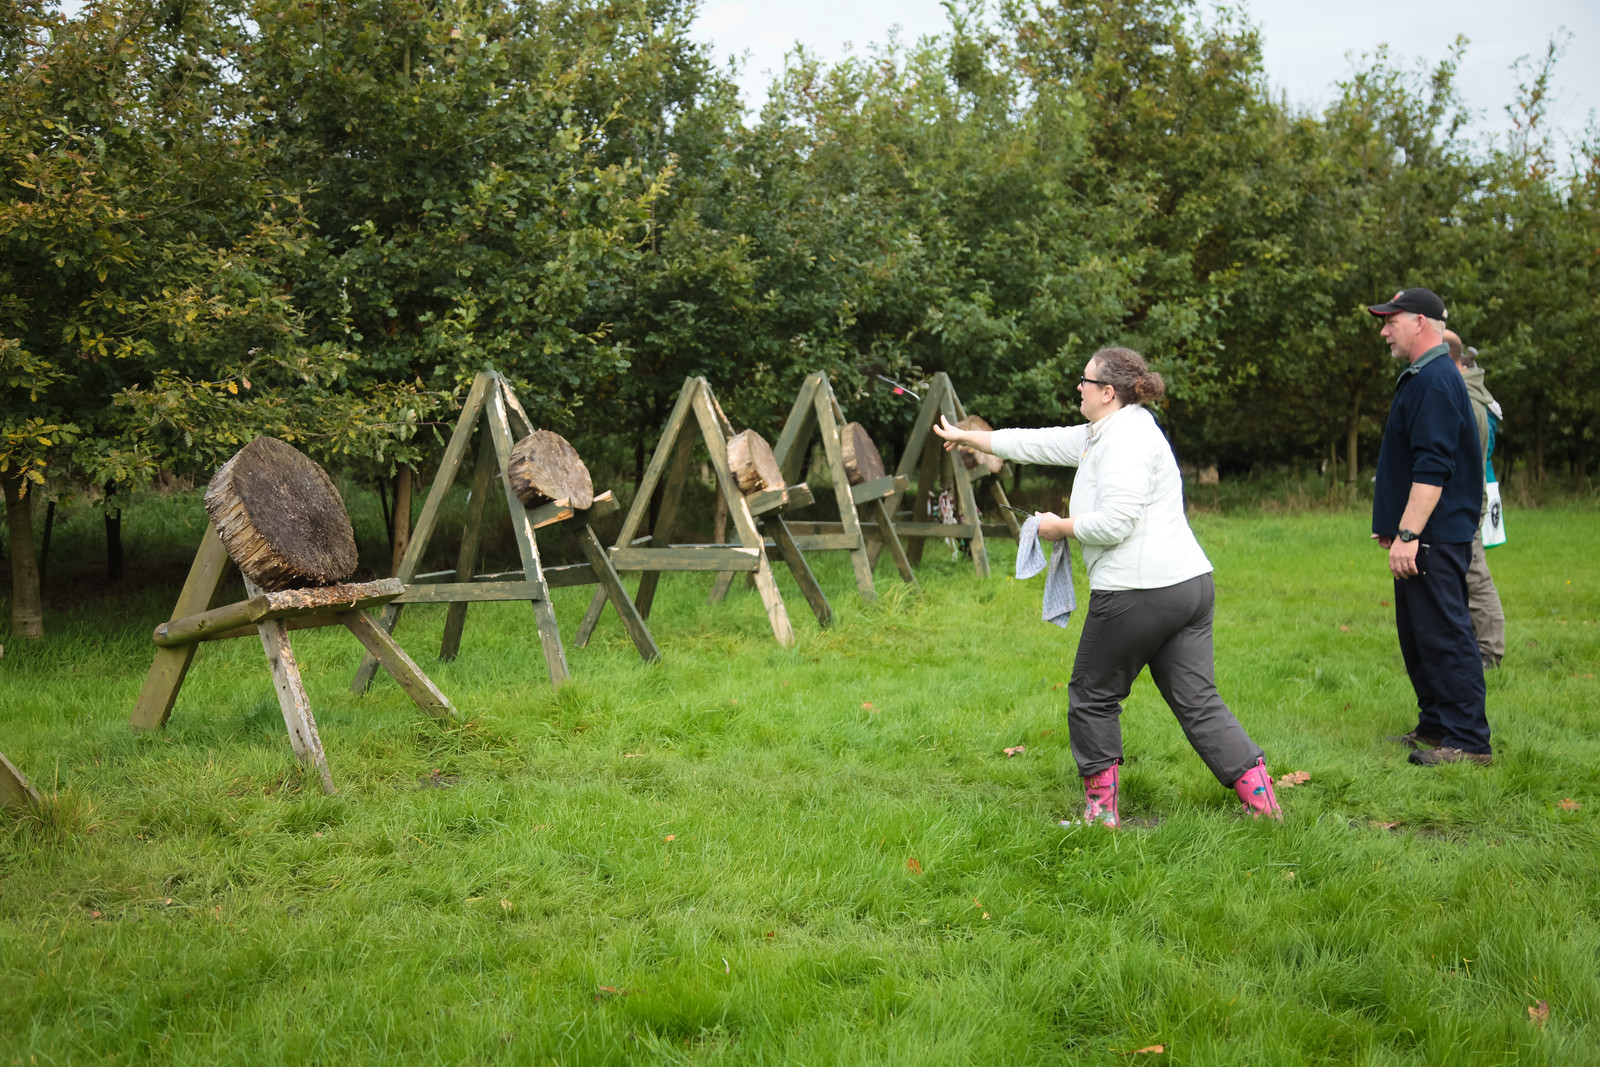 Tomahawk Throwing Course (4th April 2020)